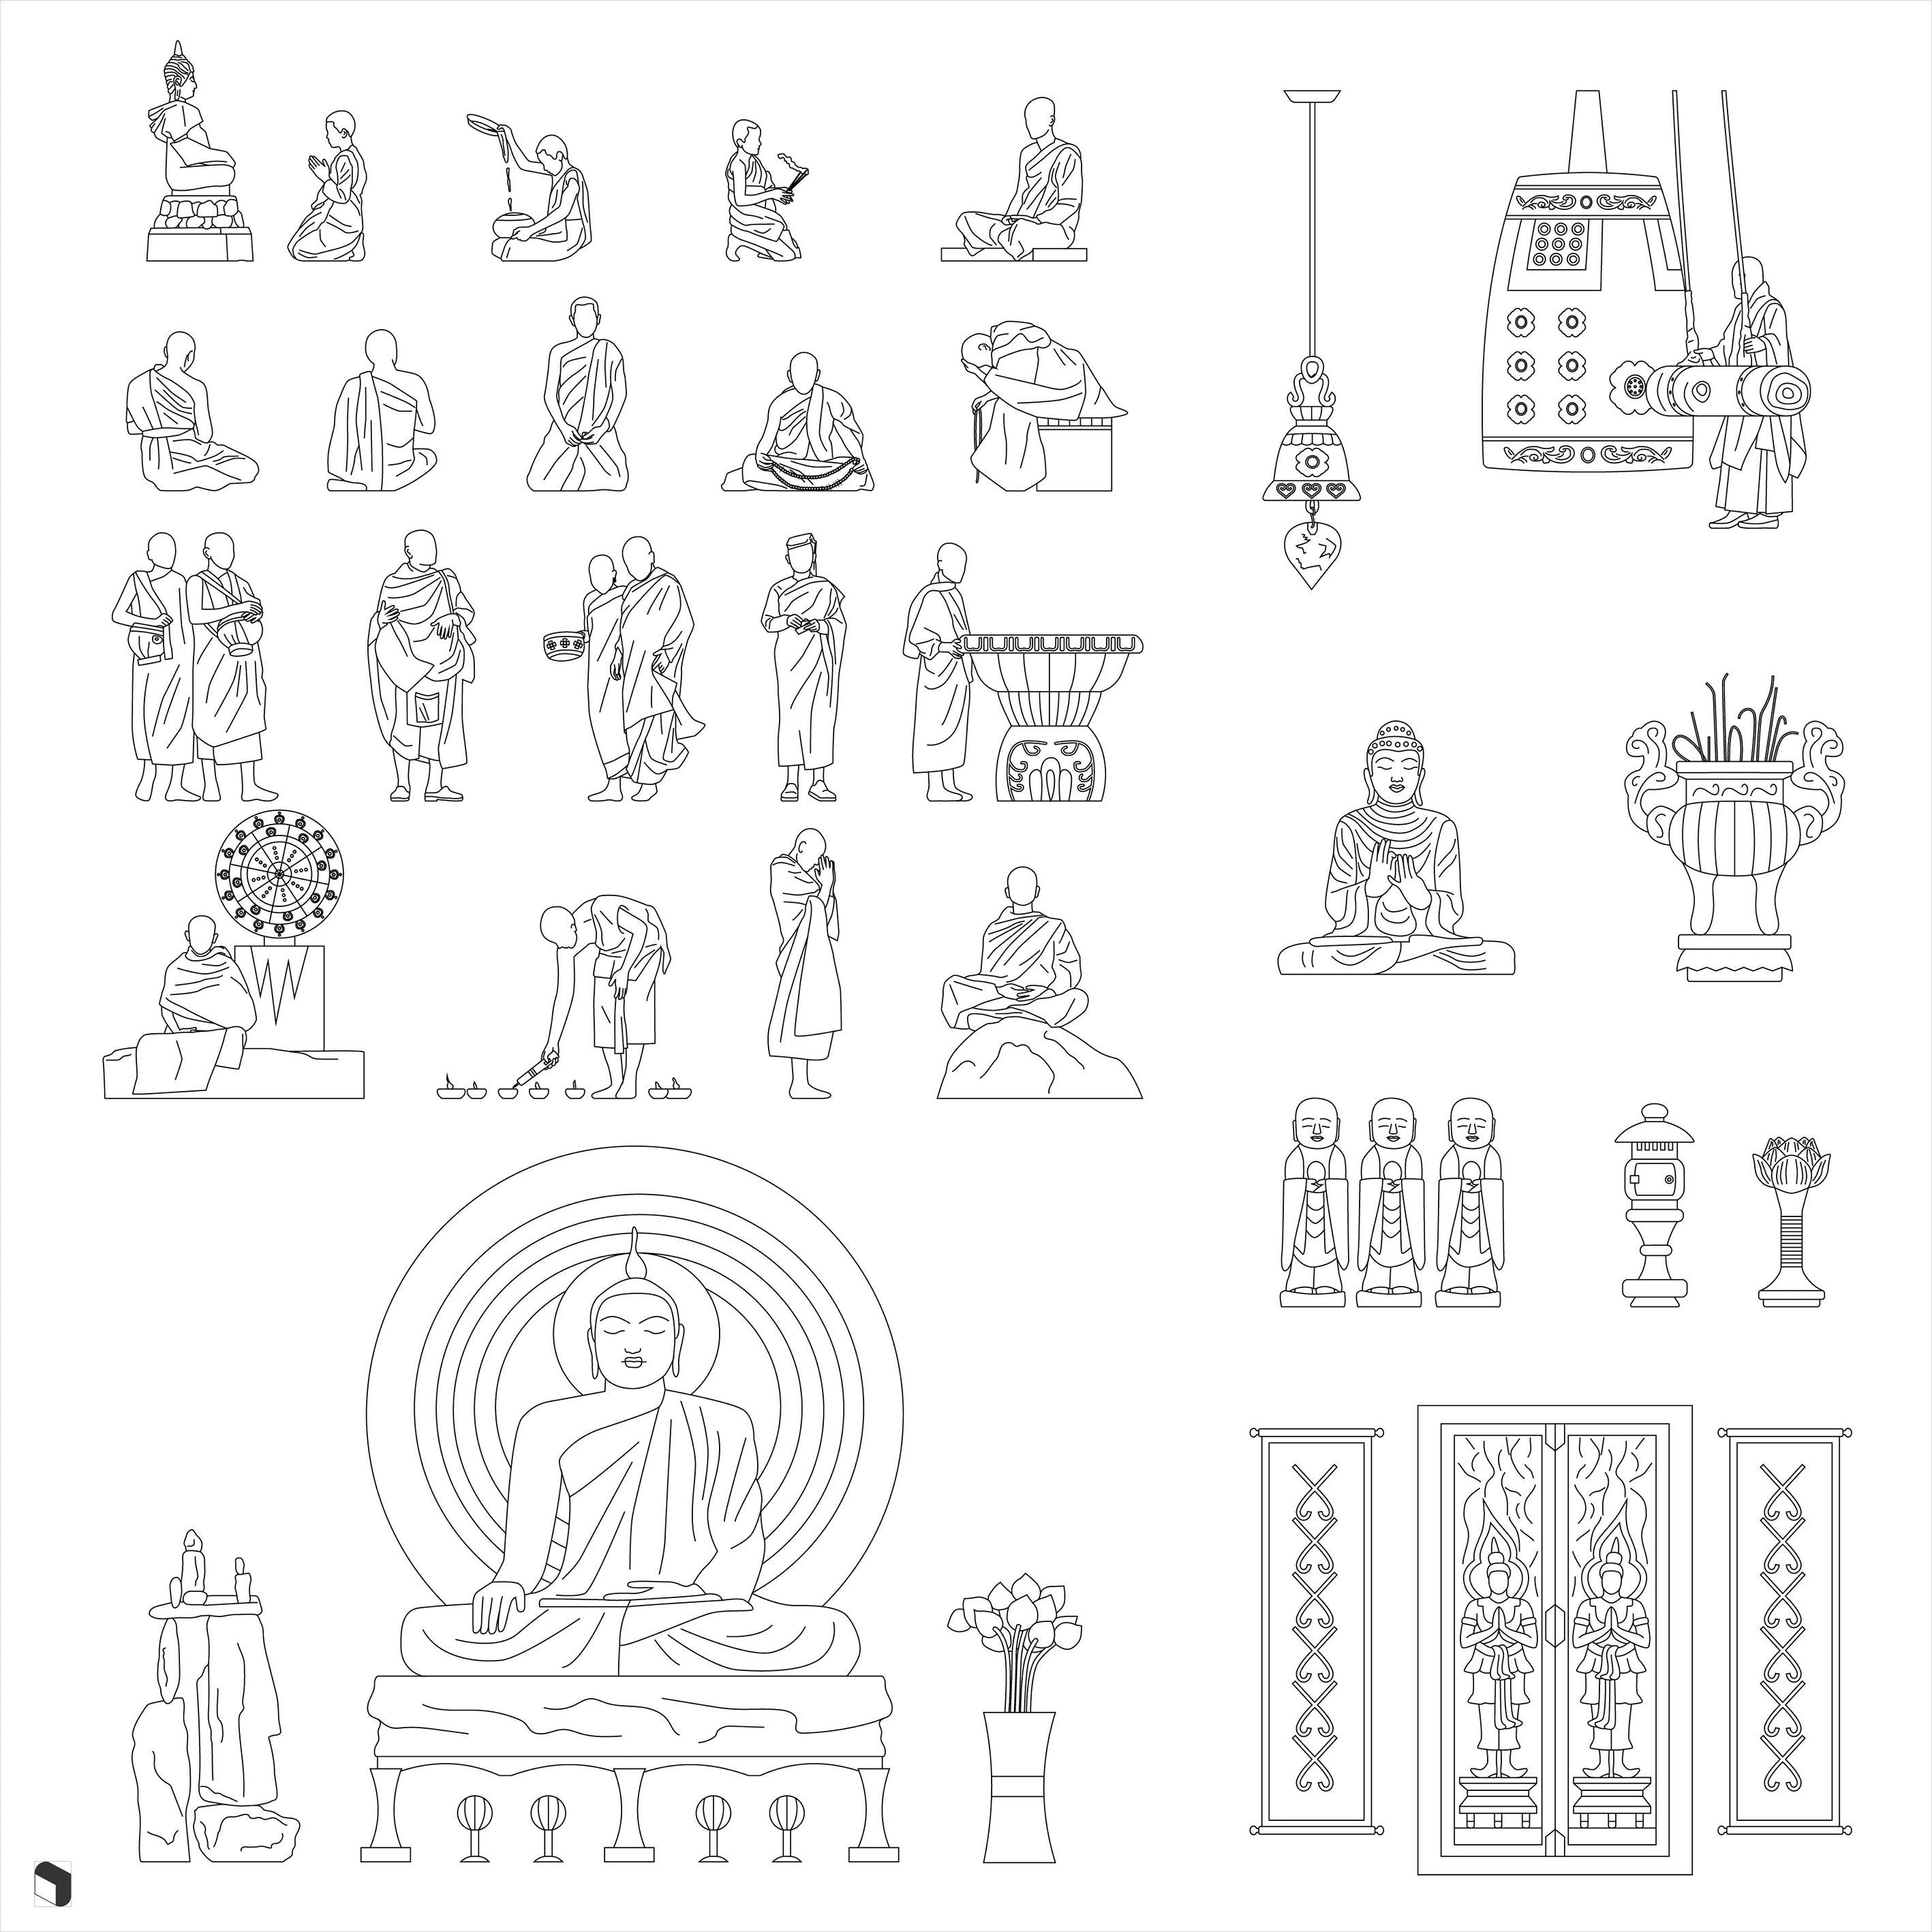 Cad Religion People 4 DWG | Toffu Co